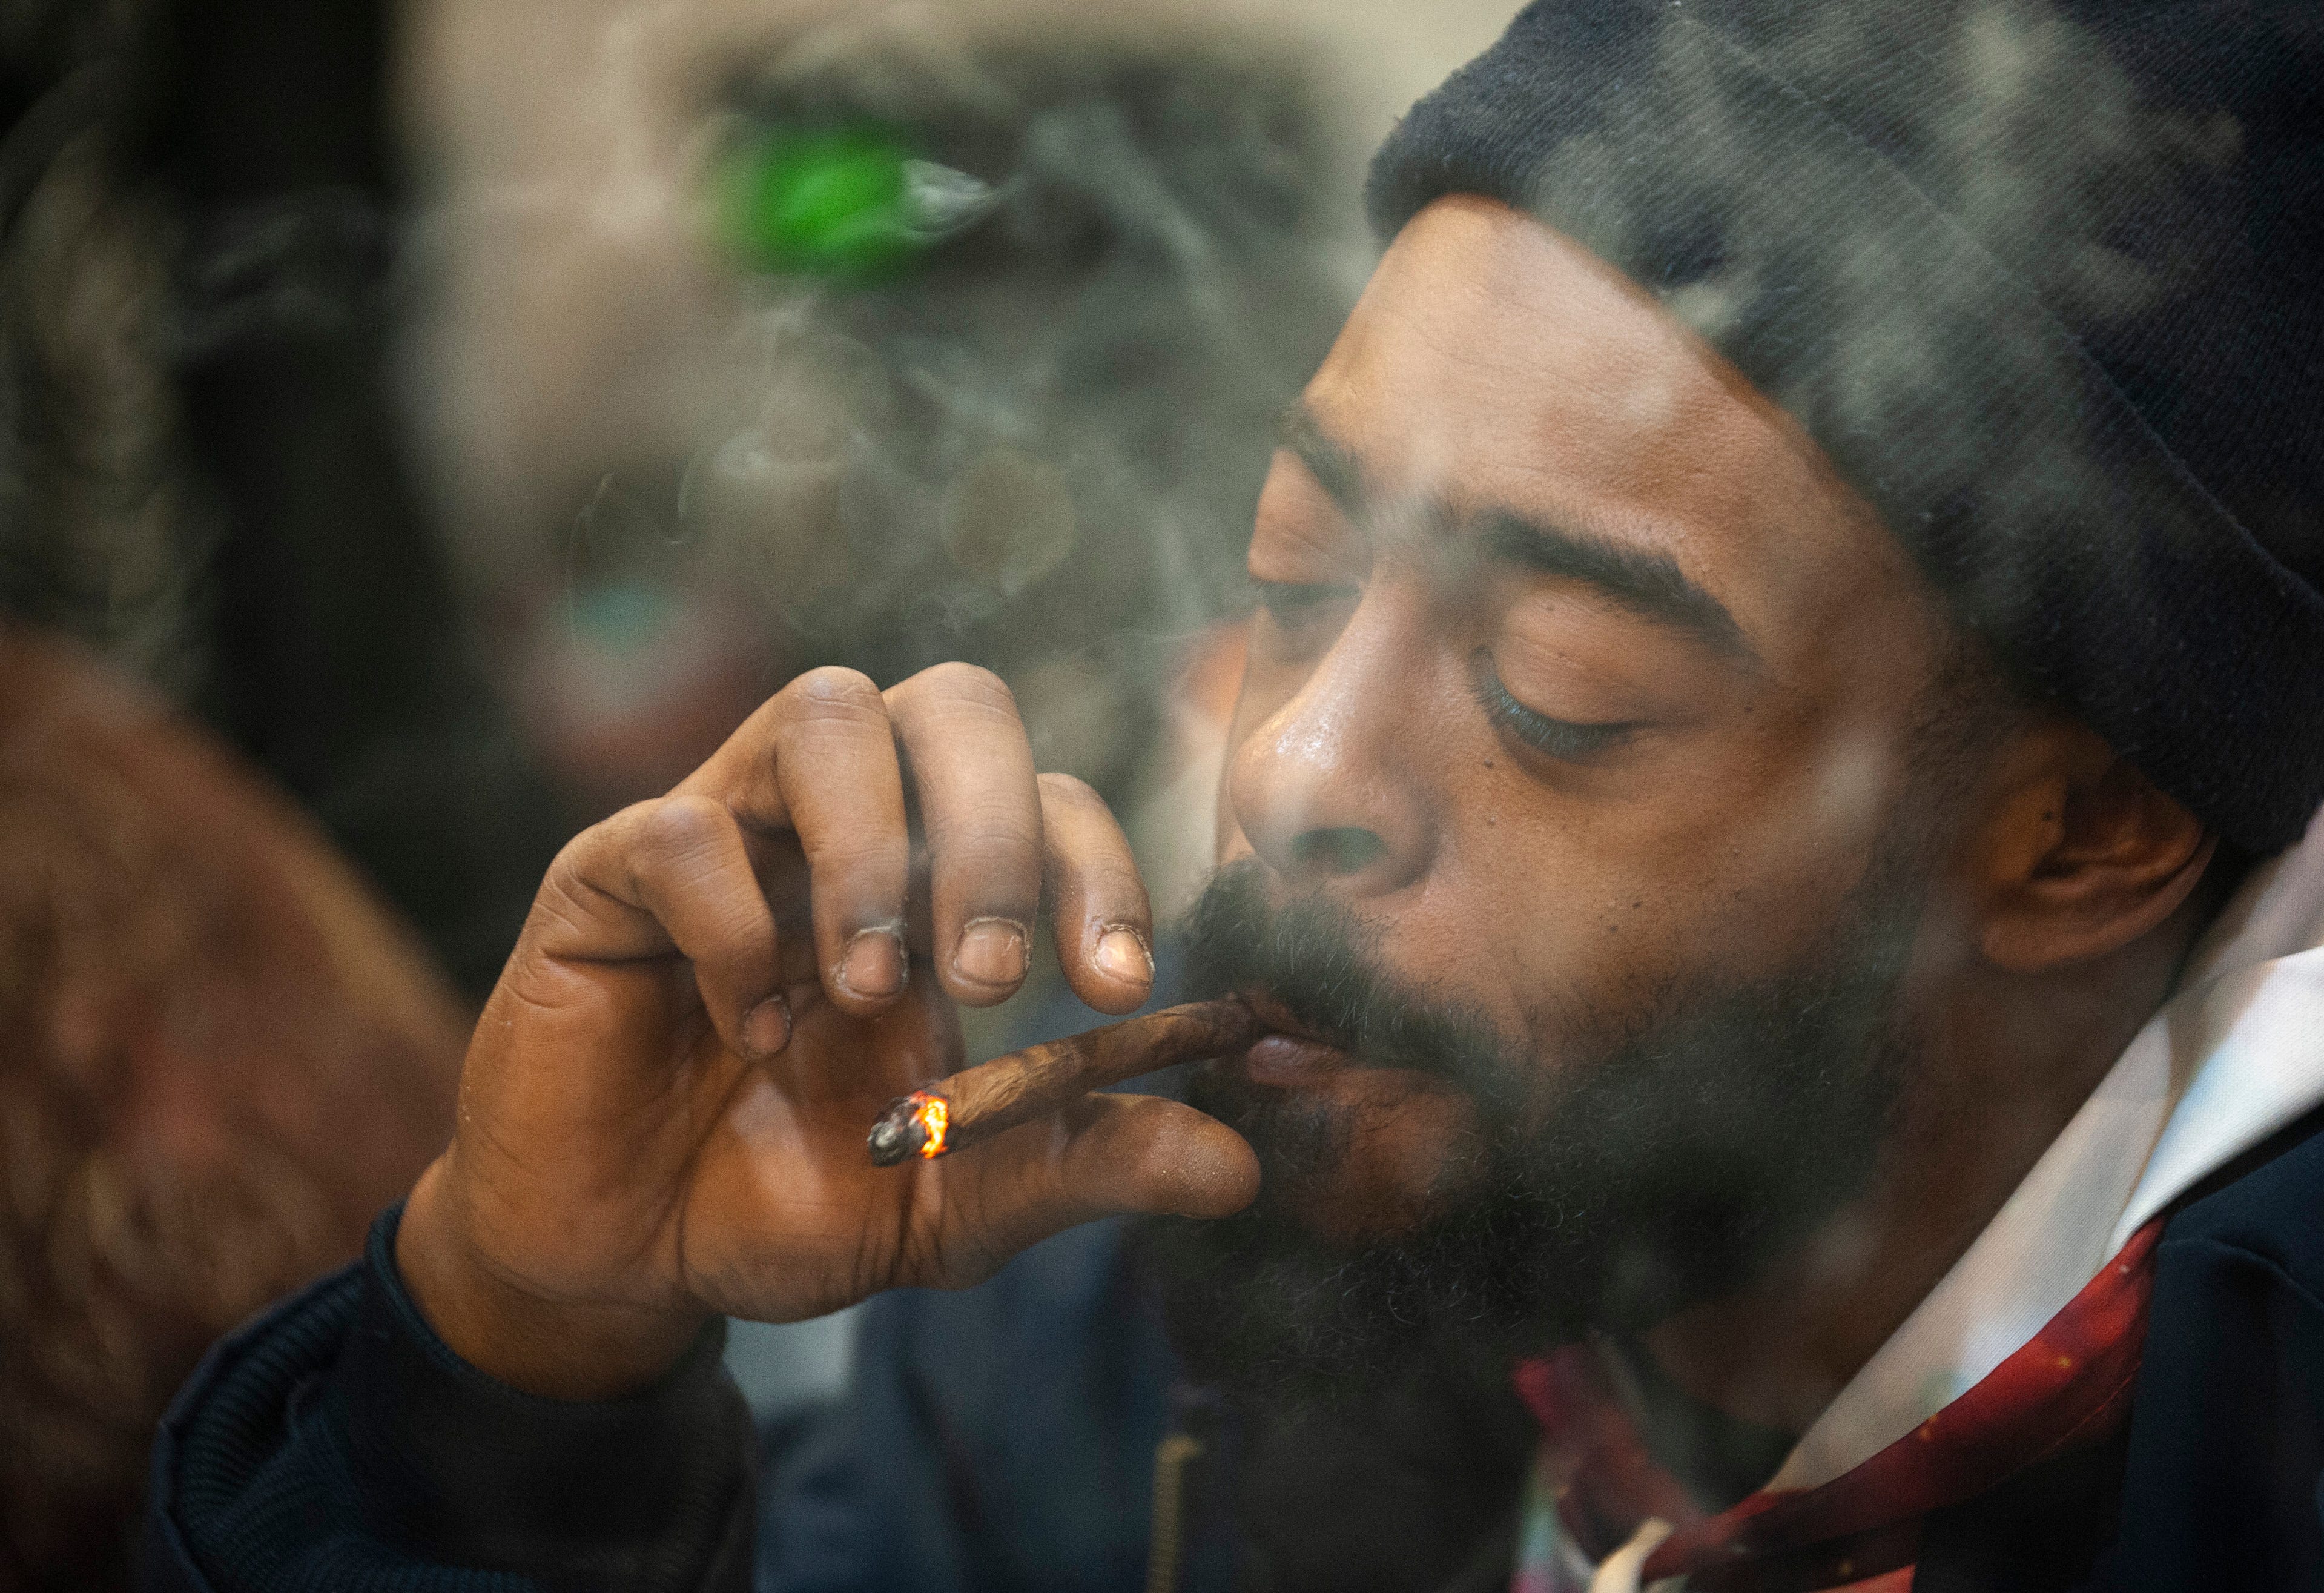 Corey Faison of Inkster puffs on a blunt, marijuana rolled up in a cigar wrap, during "The Art of Cannabis" event at the Cannabis Counsel in Detroit.